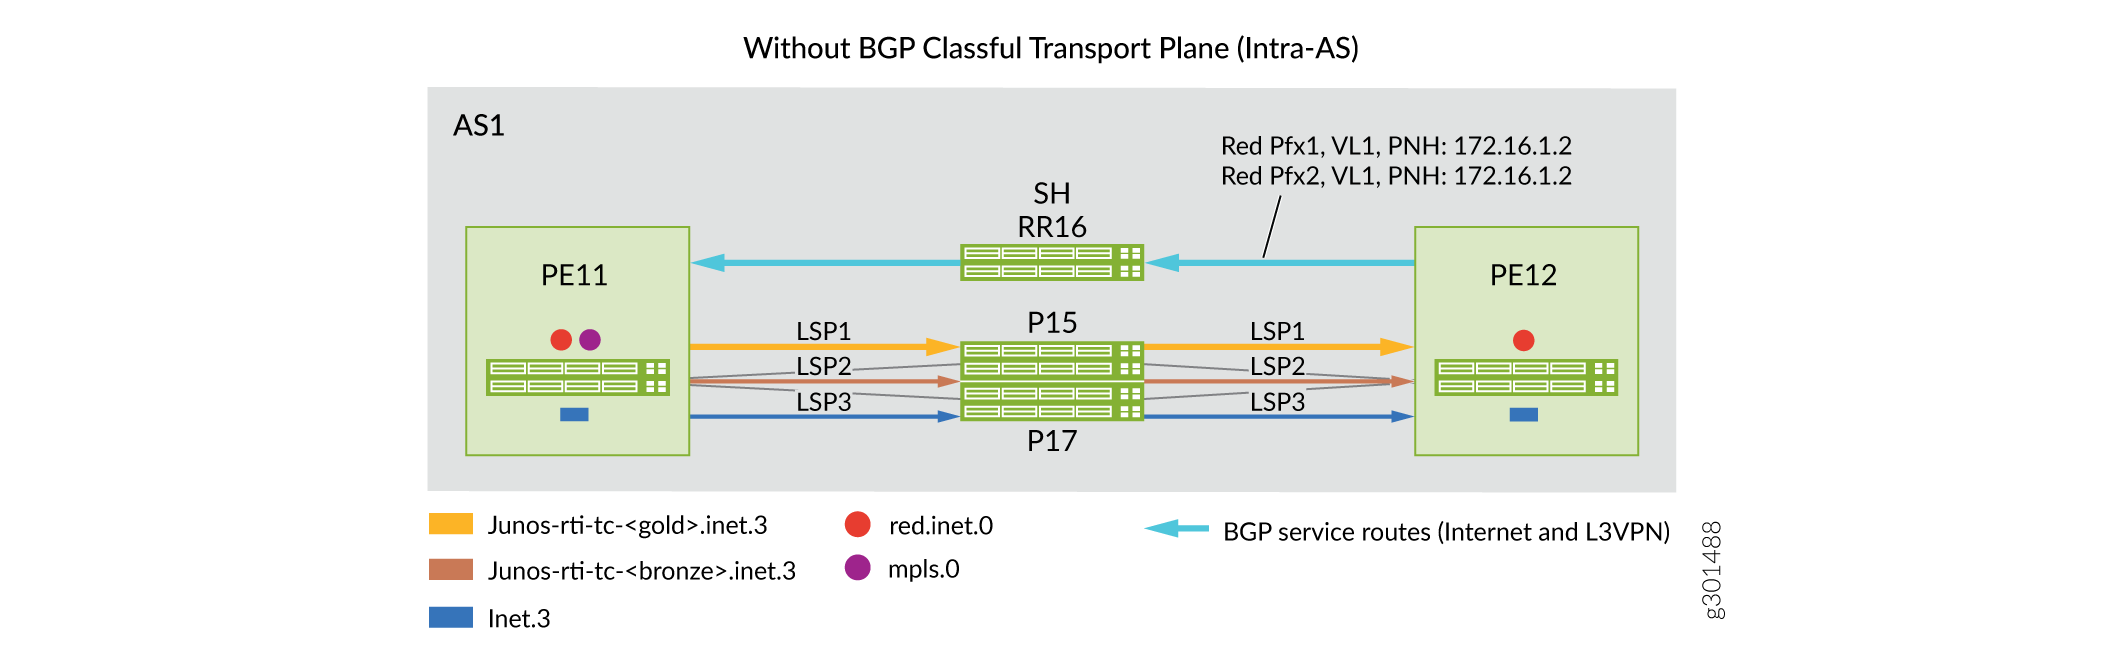 Intra-AS Domain: Before-and-After Scenarios For BGP Classful Transport Planes Implementation